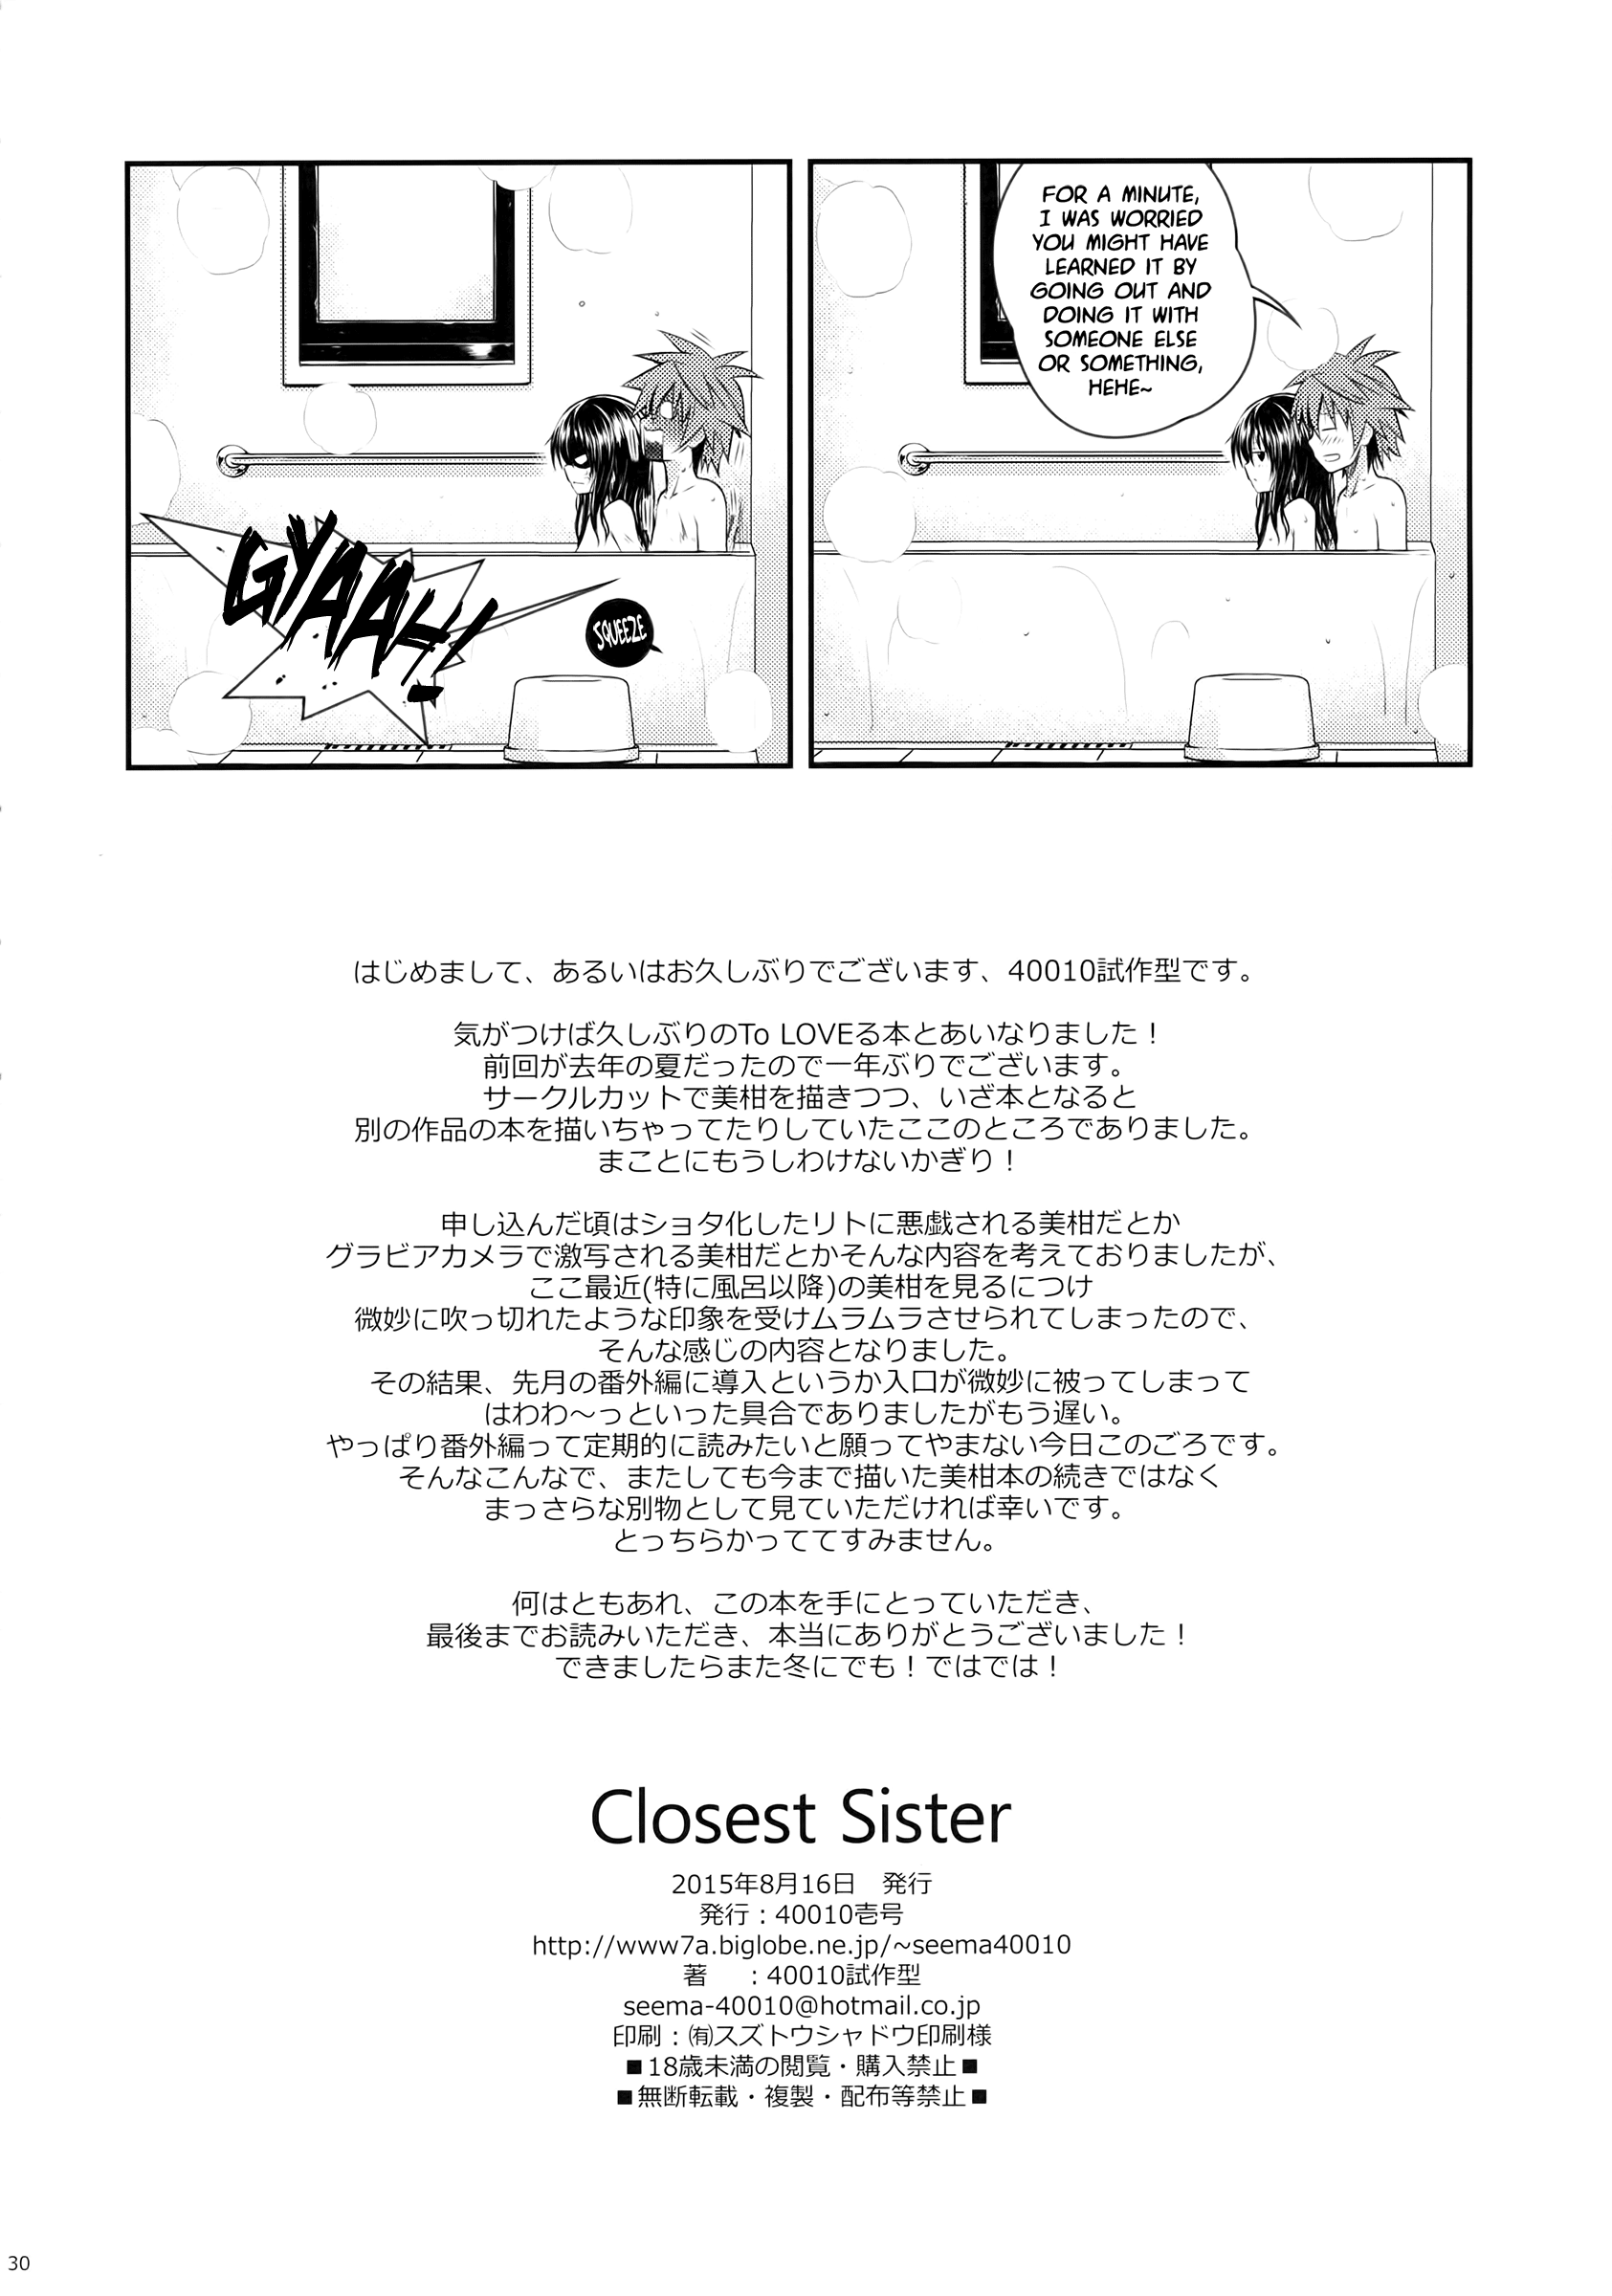 Closest Sister hentai manga picture 29